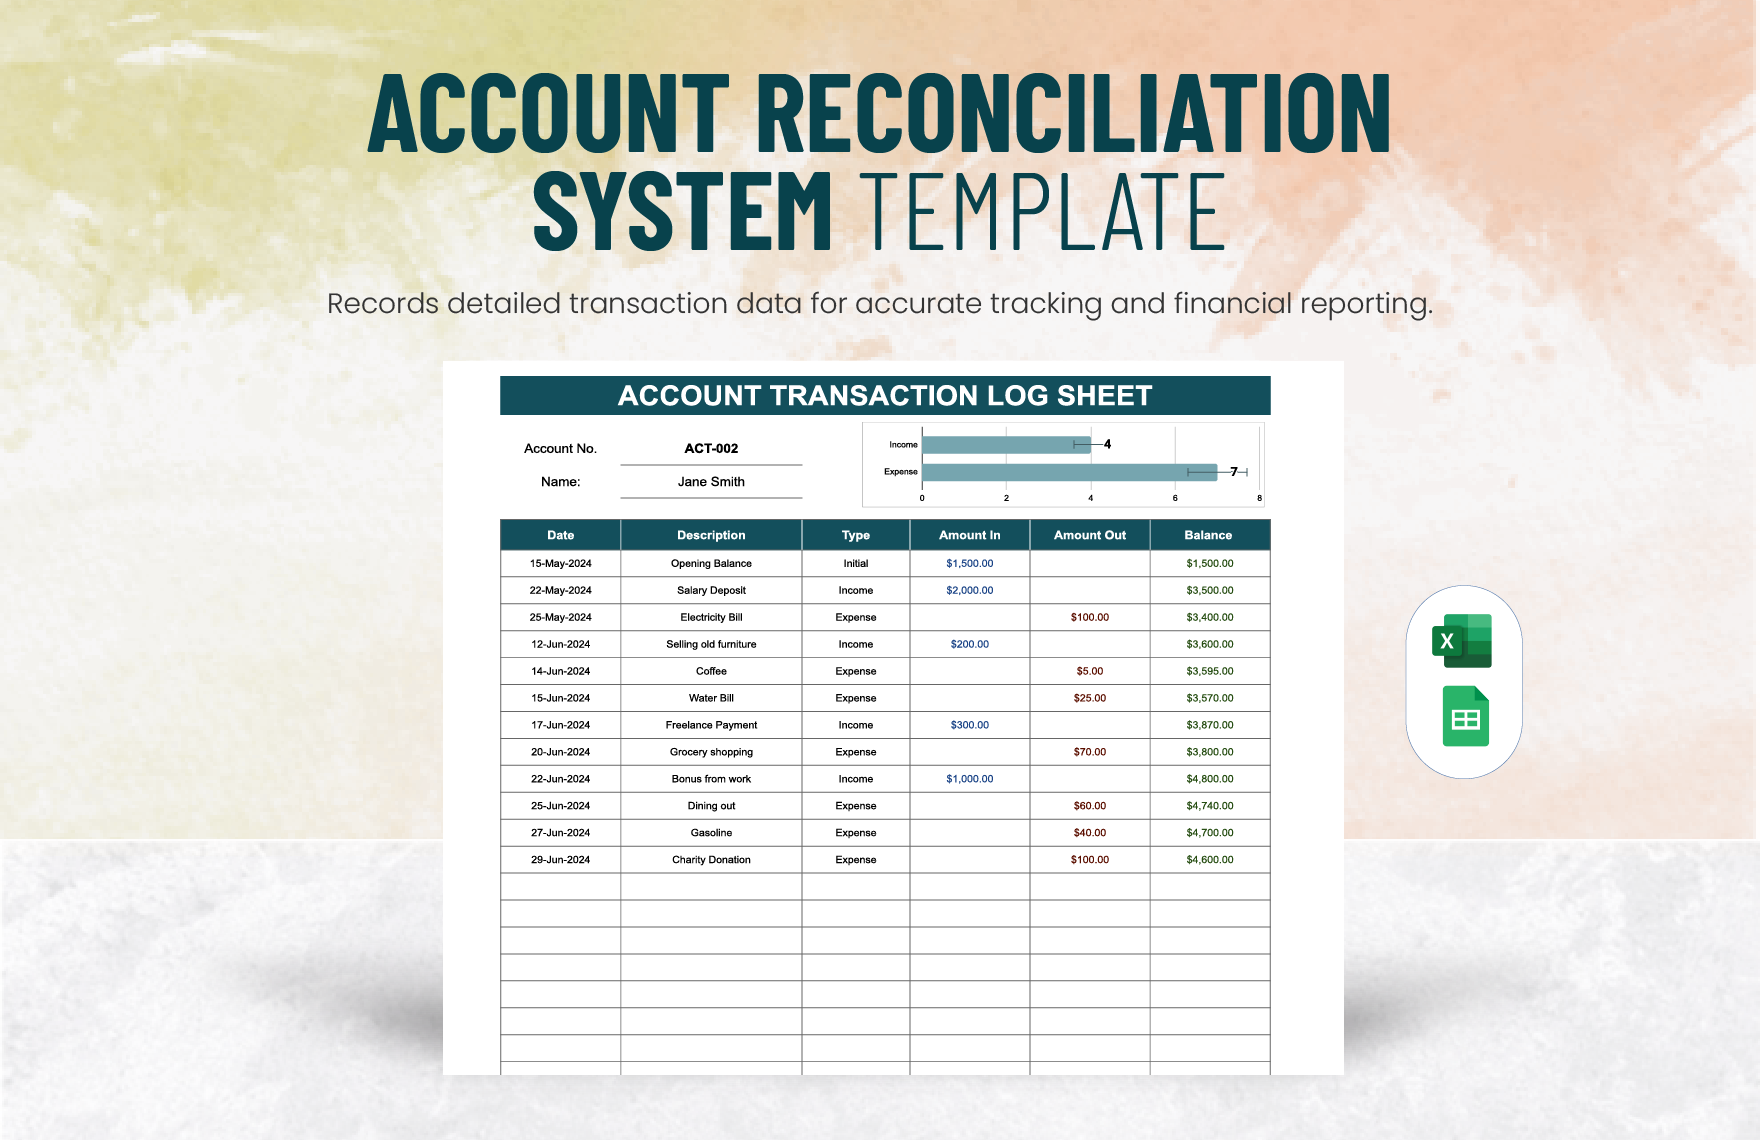 Account Transaction Log Sheet Template in Excel, Google Sheets